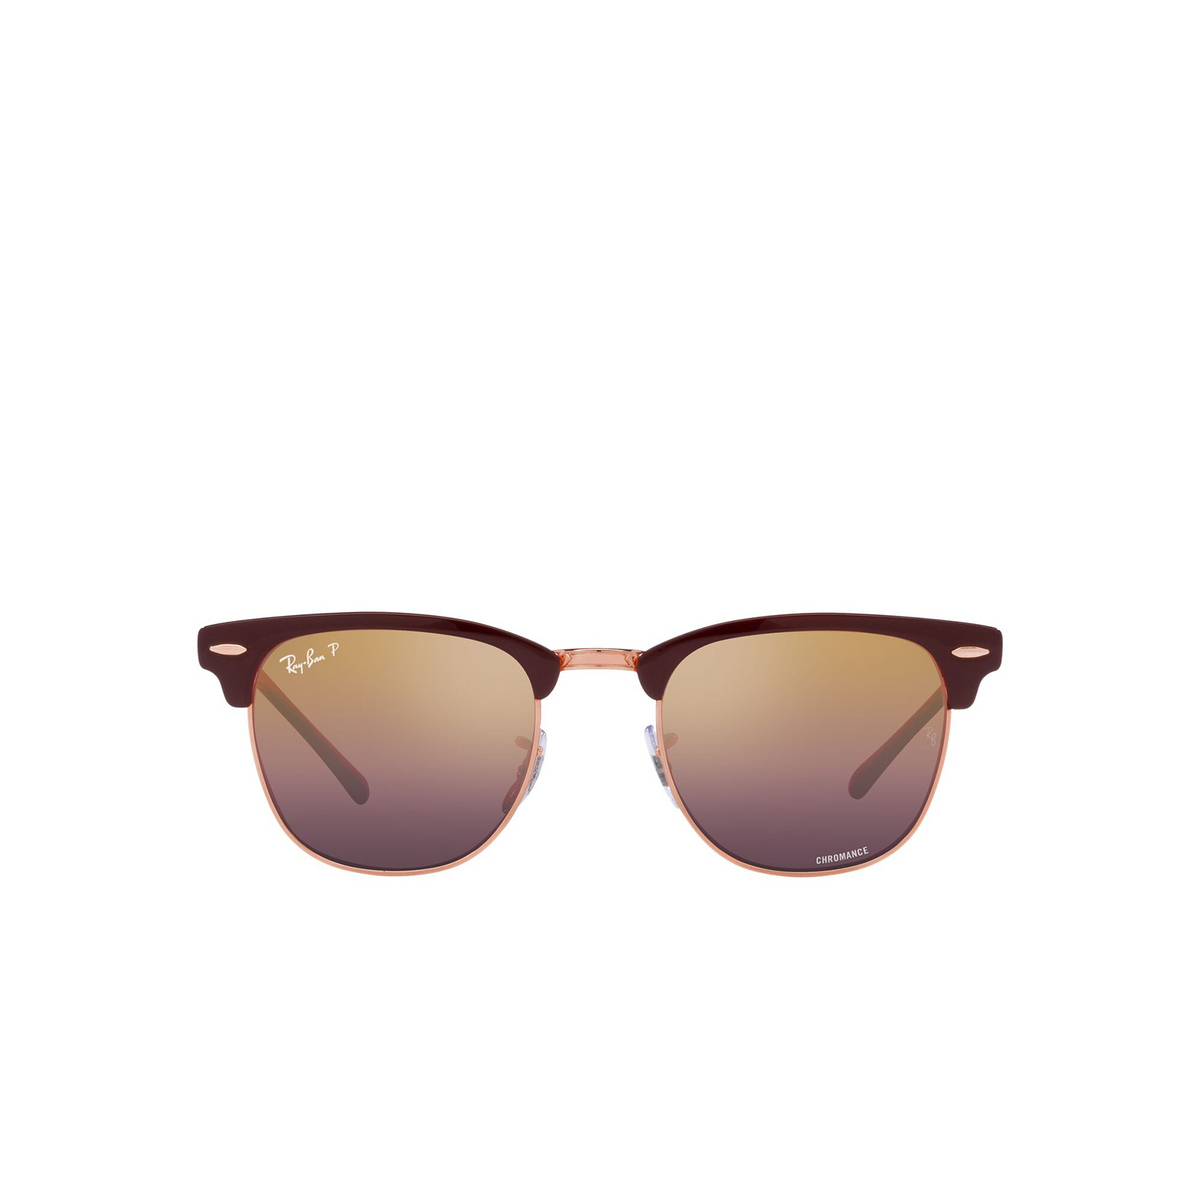 Ray-Ban CLUBMASTER METAL Sunglasses 9253G9 Bordeaux On Rose Gold - front view